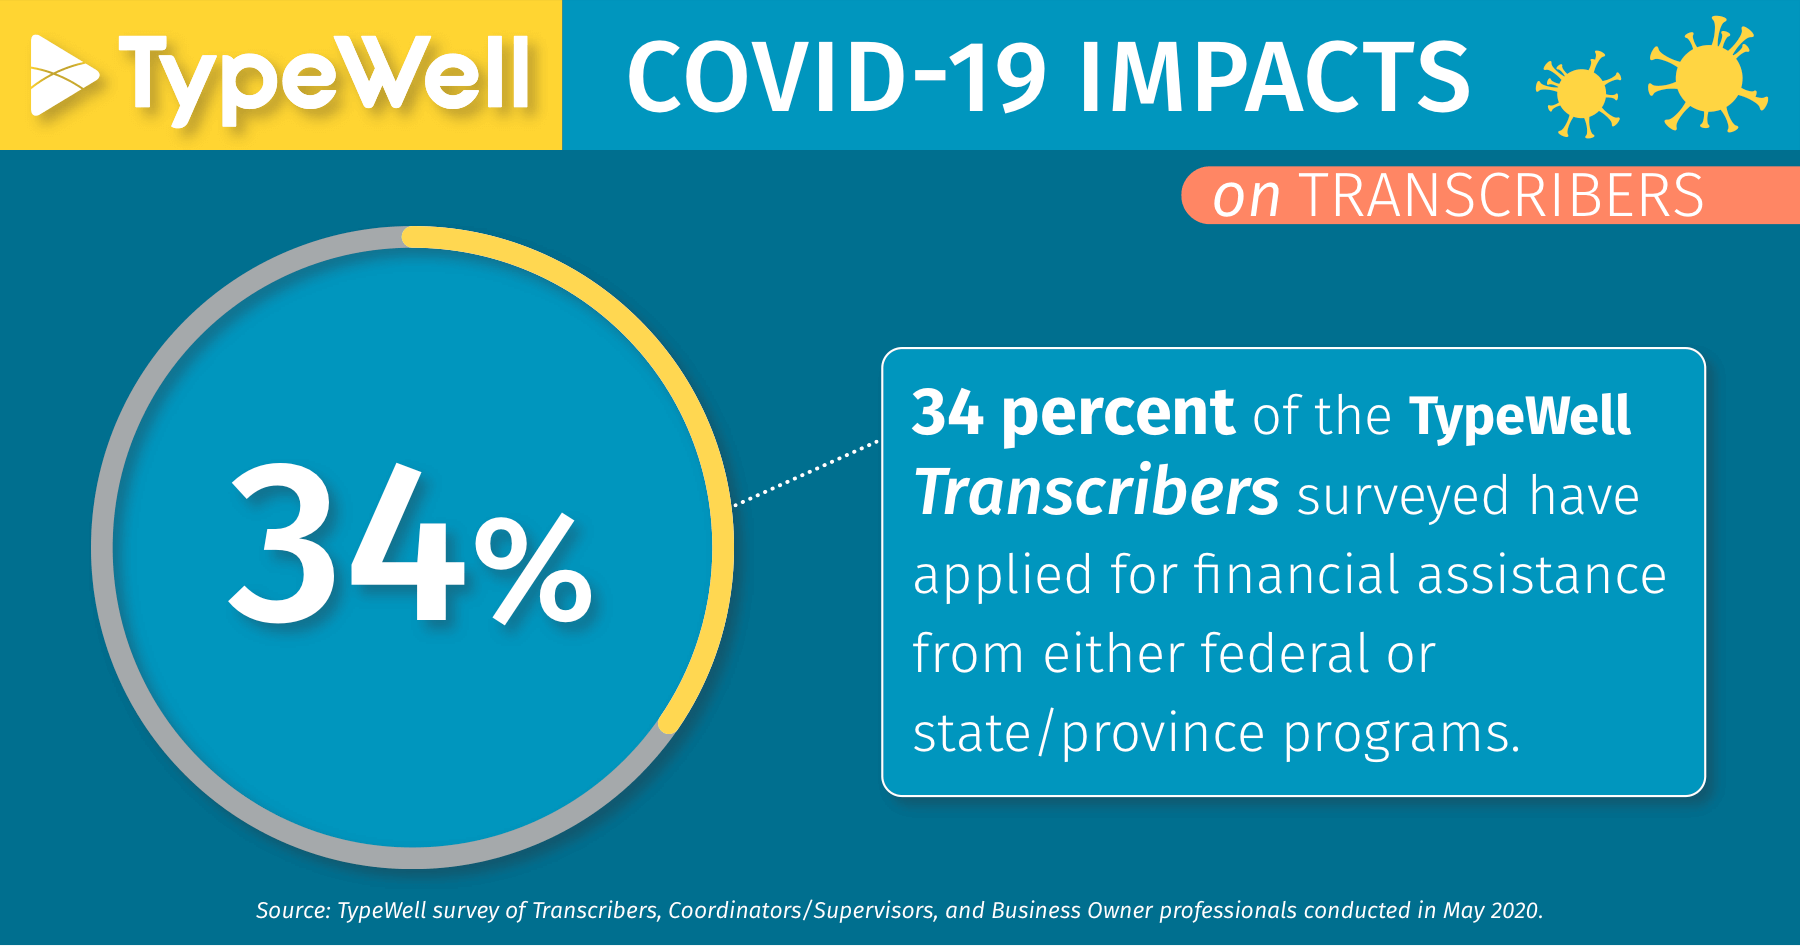 COVID-19 impacts on transcribers: 34% applied for financial assistance from either federal or state/province programs.